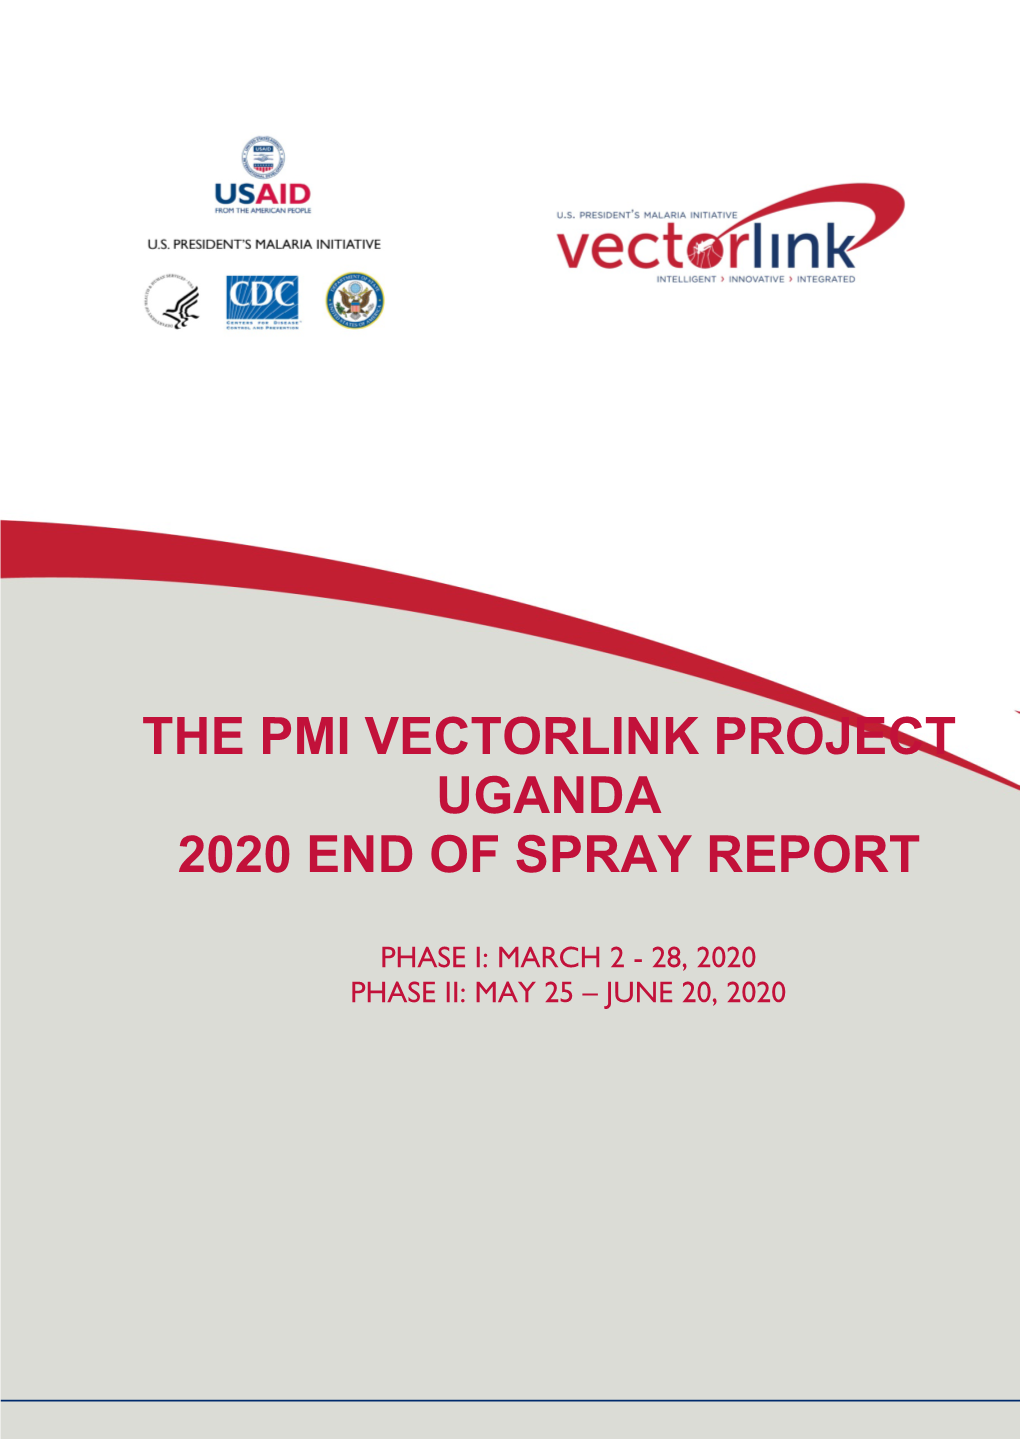 The PMI Vectorlink Project Uganda 2020 End of Spray Report Phase 1